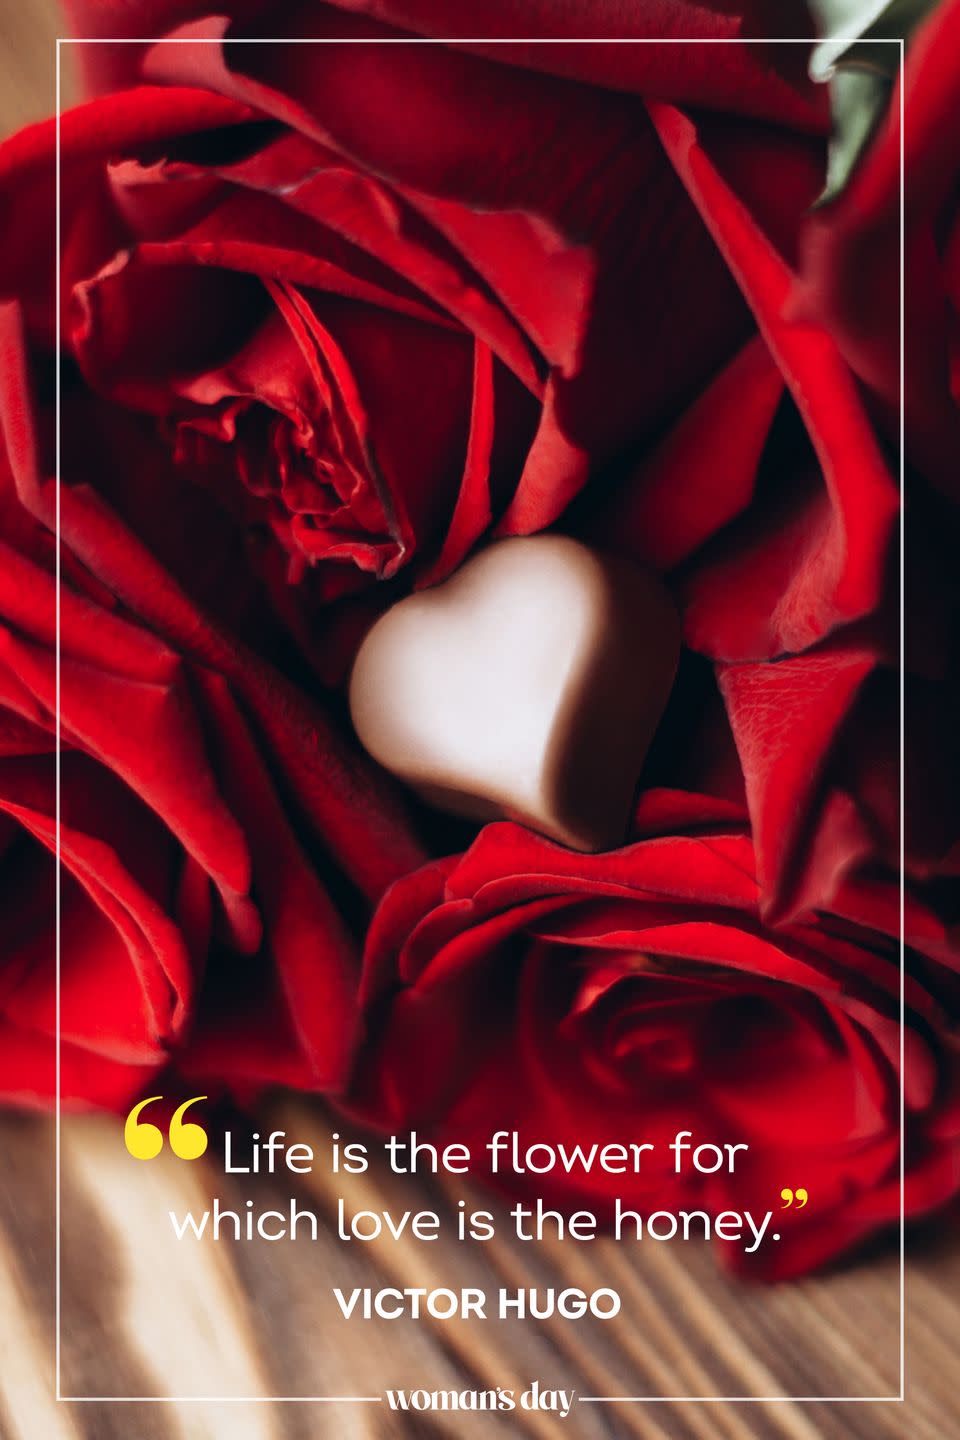 <p>"Life is the flower for which love is the honey." — Victor Hugo</p>